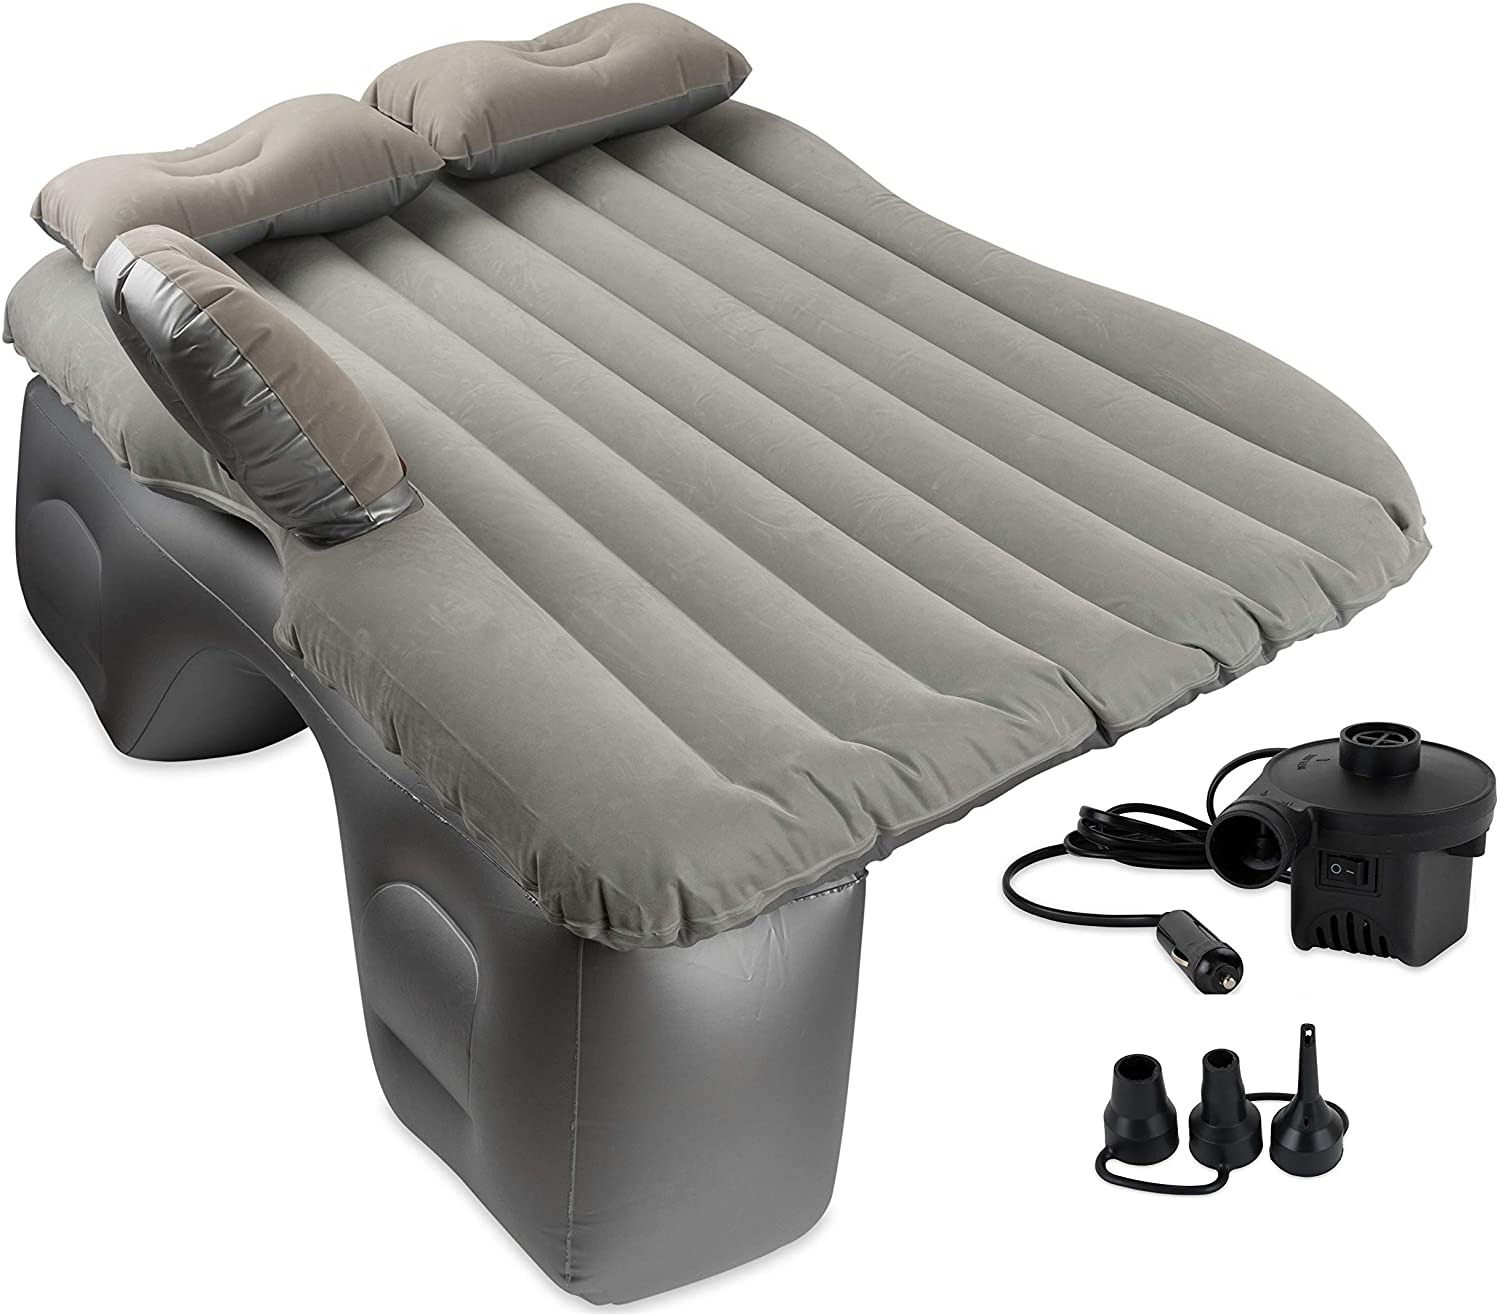 Self Inflatable Cushion Portable Rest Air Pillow Compact Travel